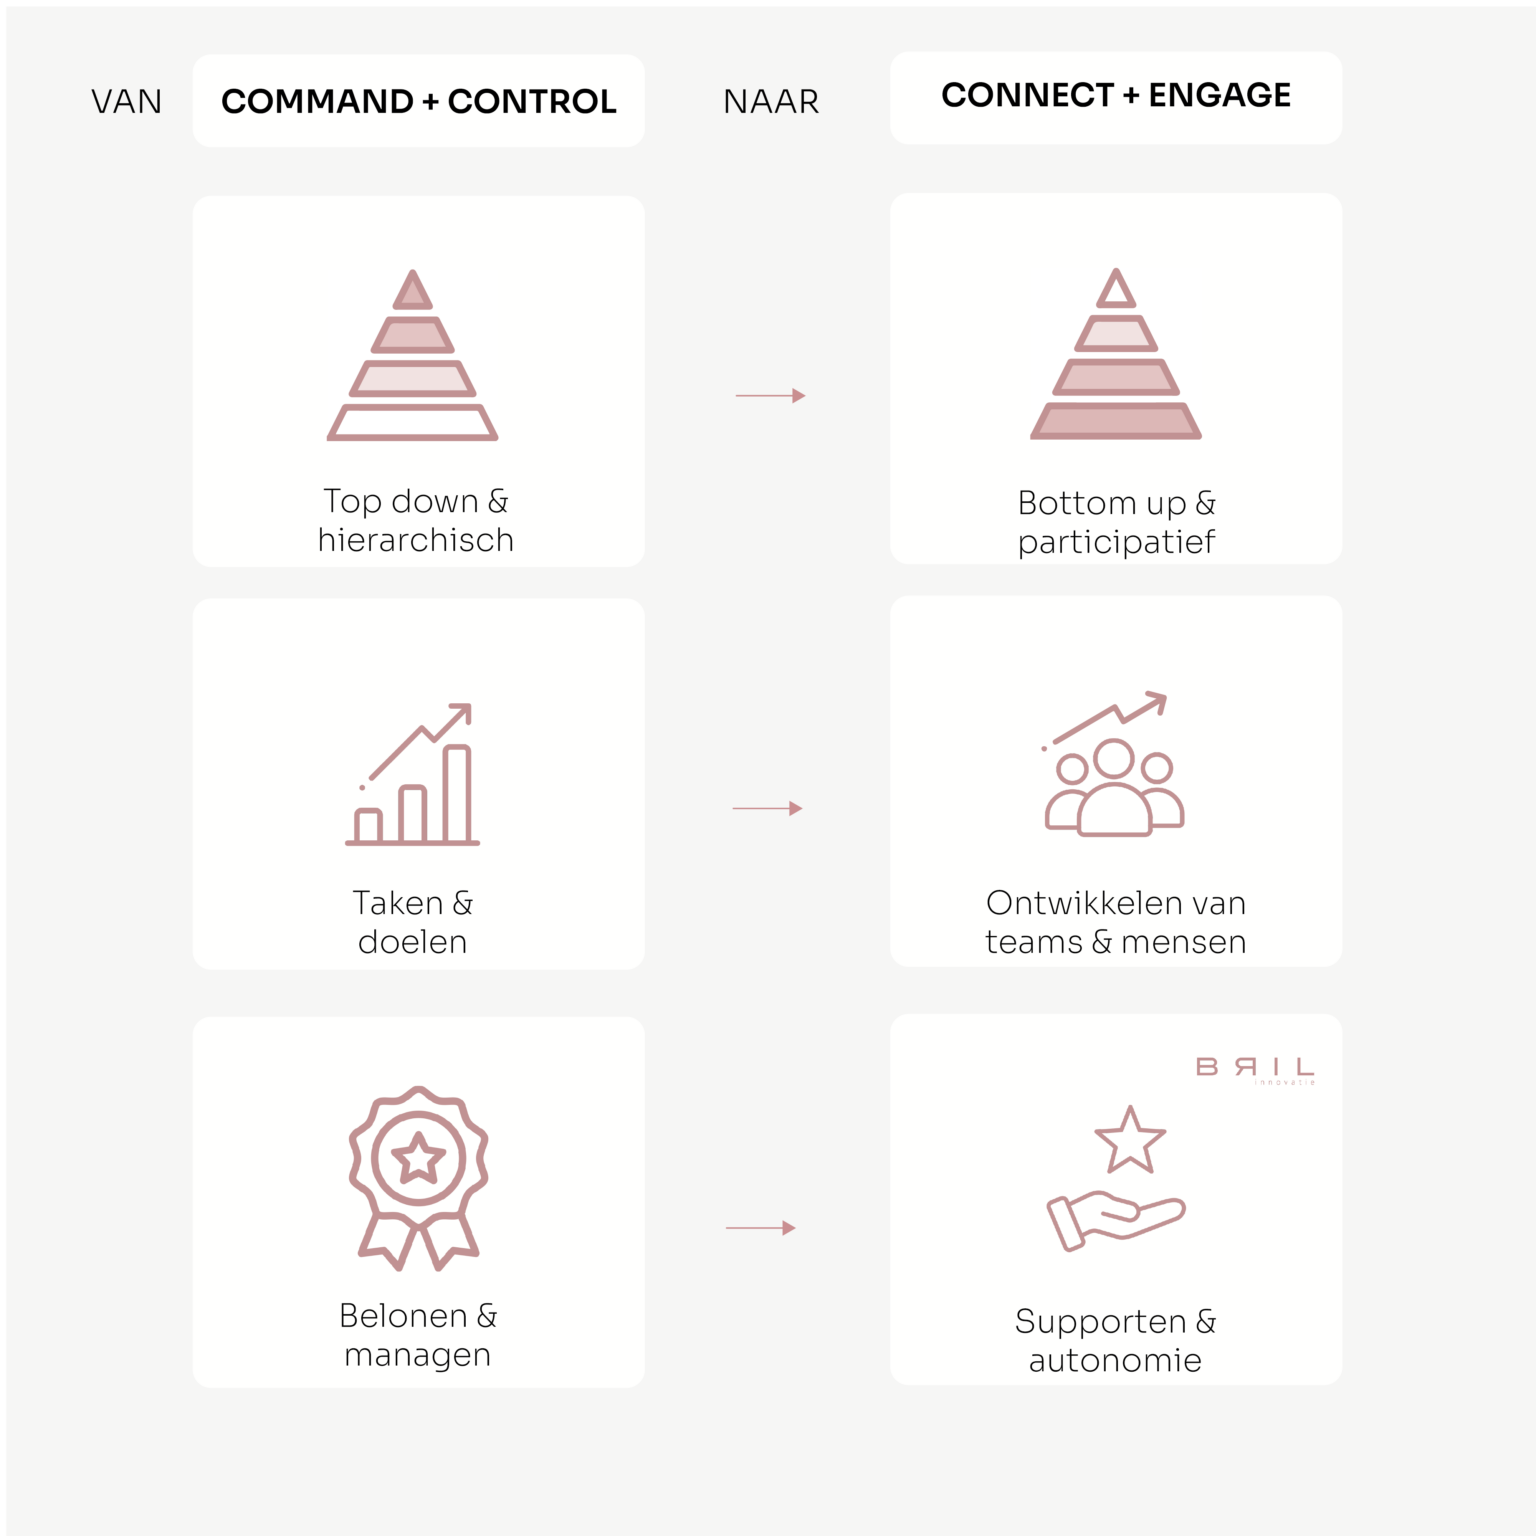 Model Command + Control naar Connect + Engage